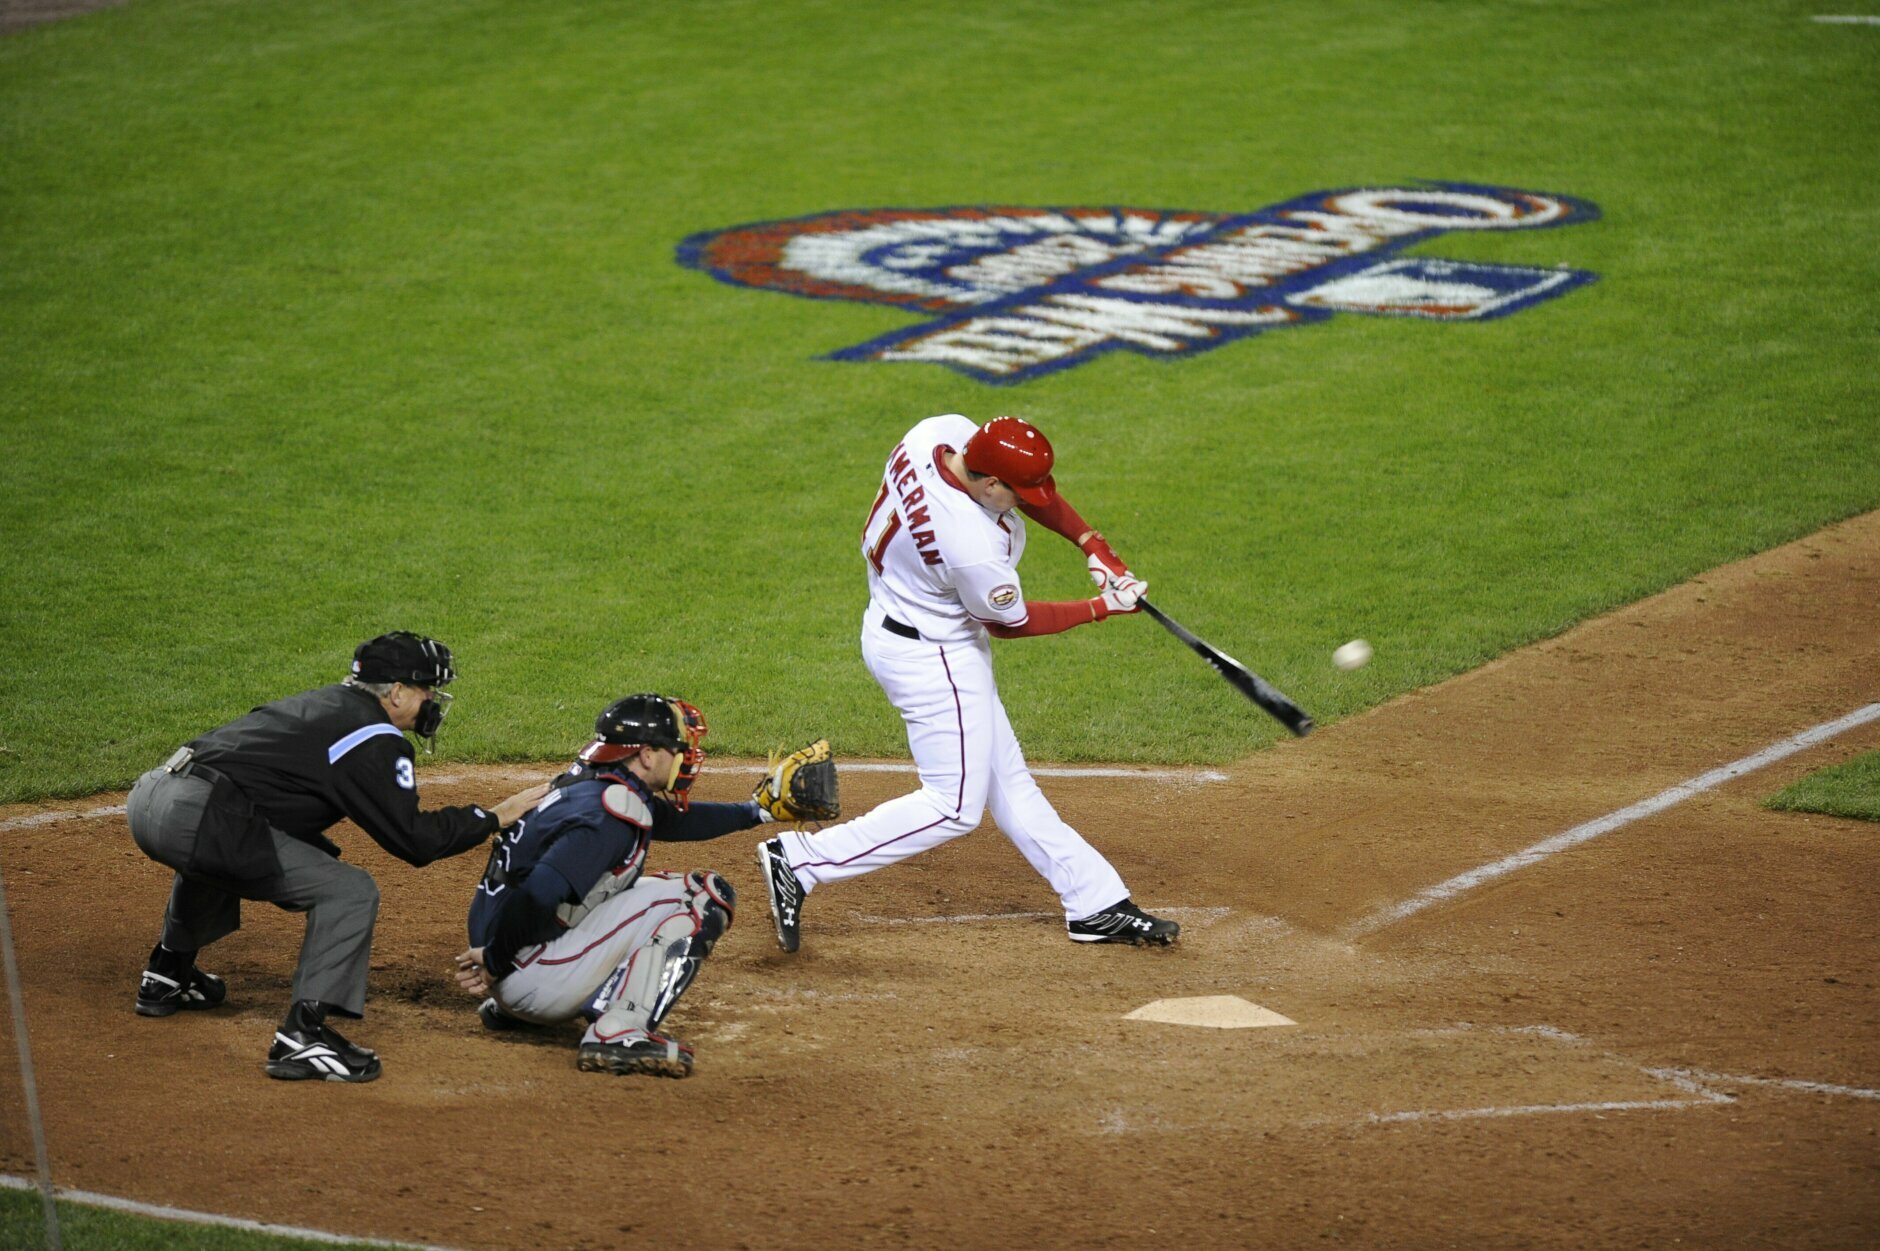 WASHINGTON - MARCH 30:  Ryan Zimmerman #11 of the Washington Nationals hits the game winning home-run in the bottom of the 9th inning during the game against the Atlanta Braves on opening day on March 30, 2008 at Nationals Park in Washington, D.C. The Nationals won 3-2. (Photo by G Fiume/Getty Images)